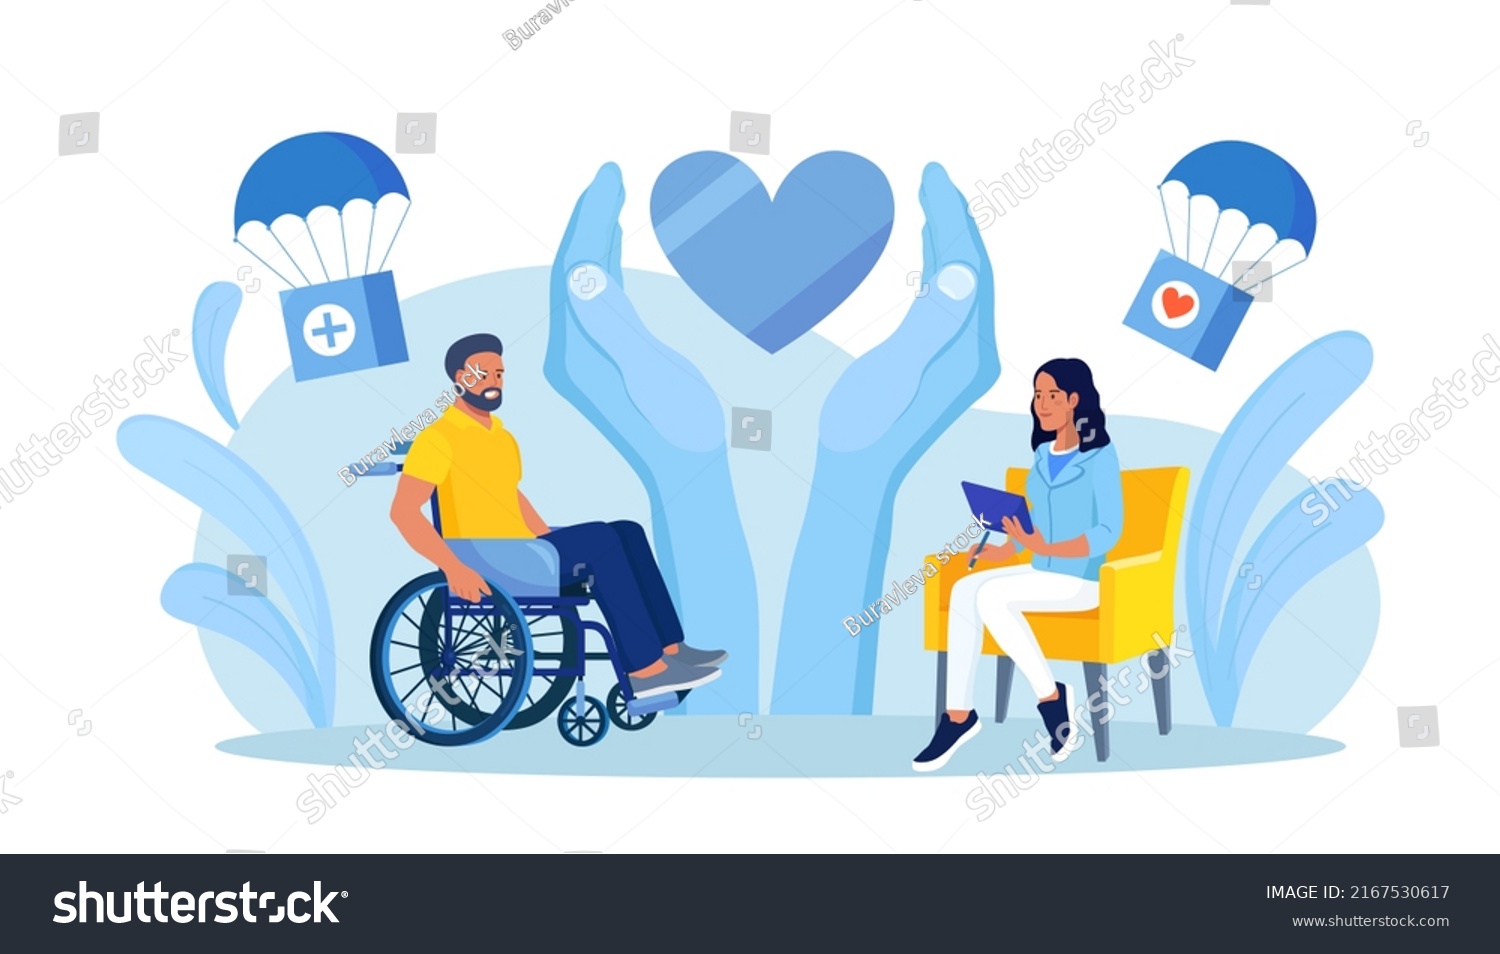 SVG of Psychology support for person in wheelchair. Woman caring about man mental health. Social aid and assistance. Solidarity from charitable community, supportive society. Supporting man with disability svg